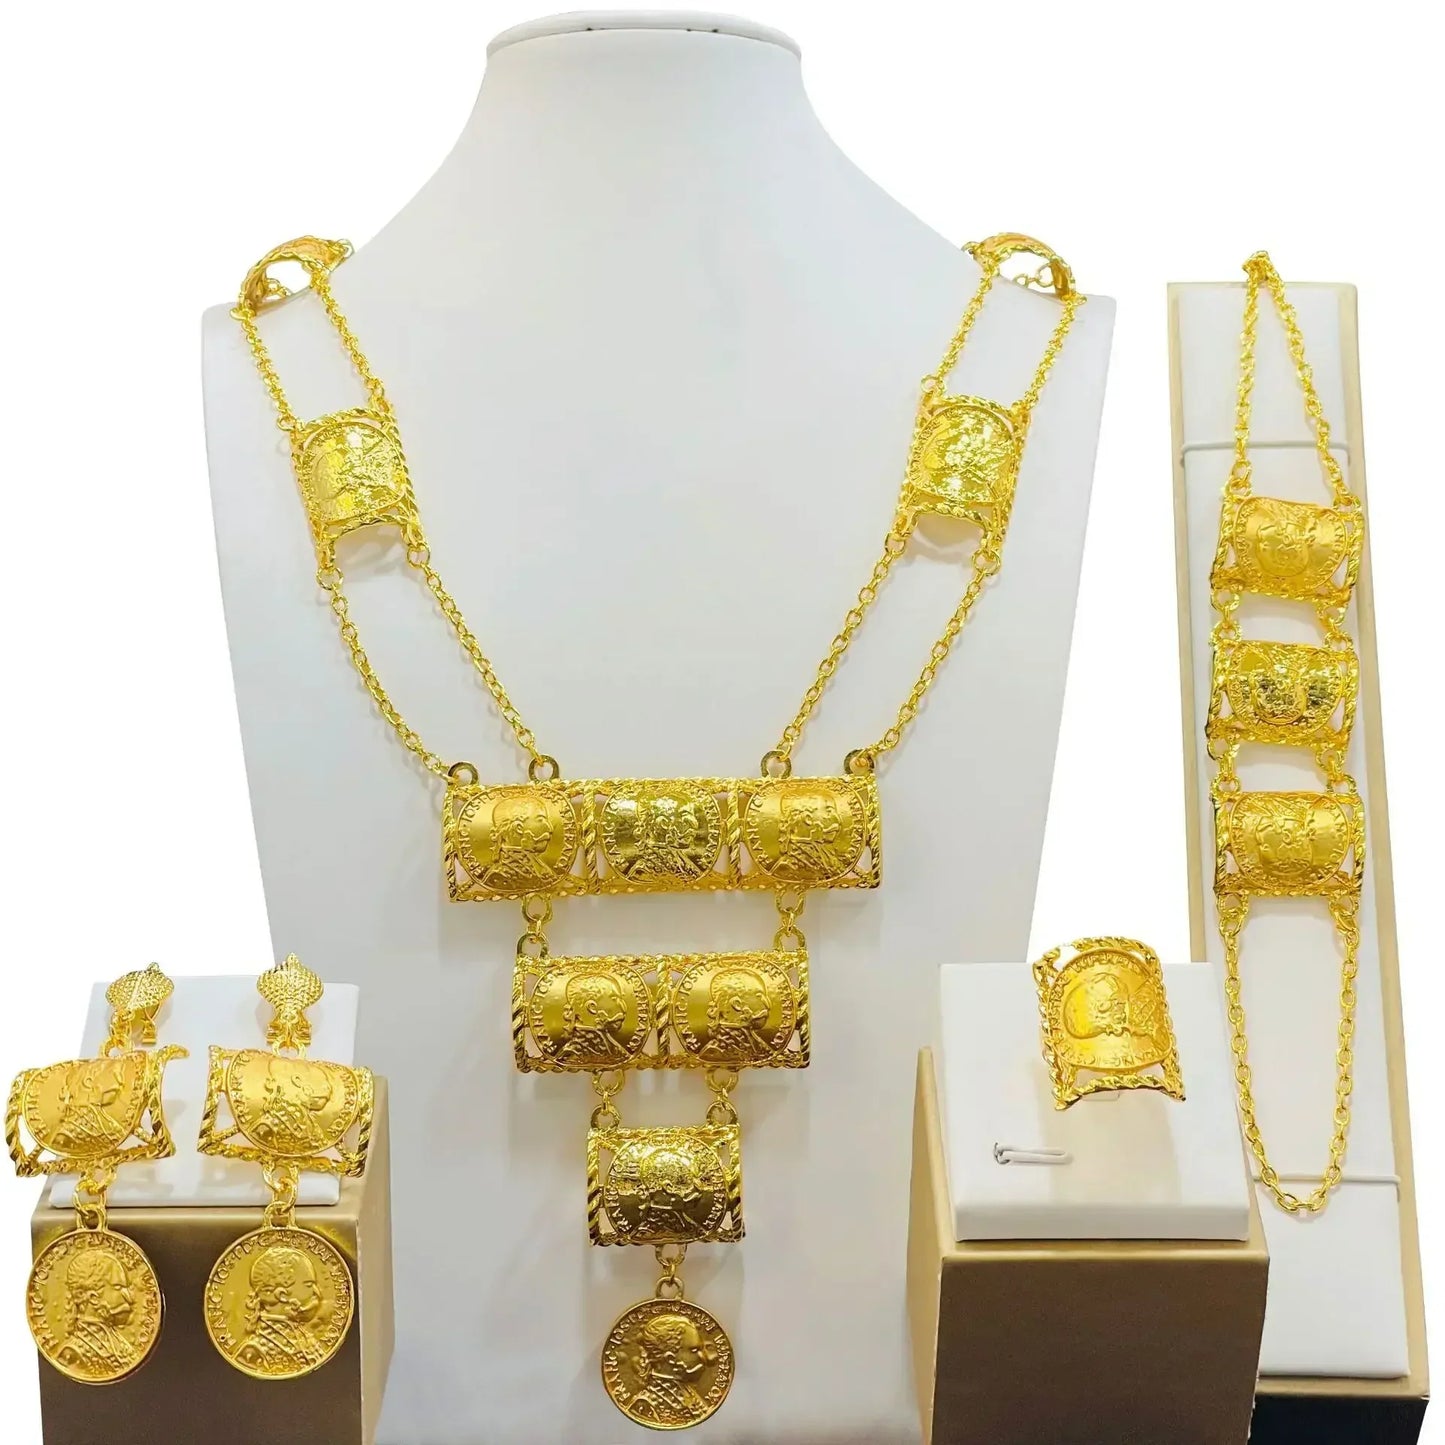 Indian Bridal Jewelry Set Dubai Necklace 24k Gold Plated African Jewelry